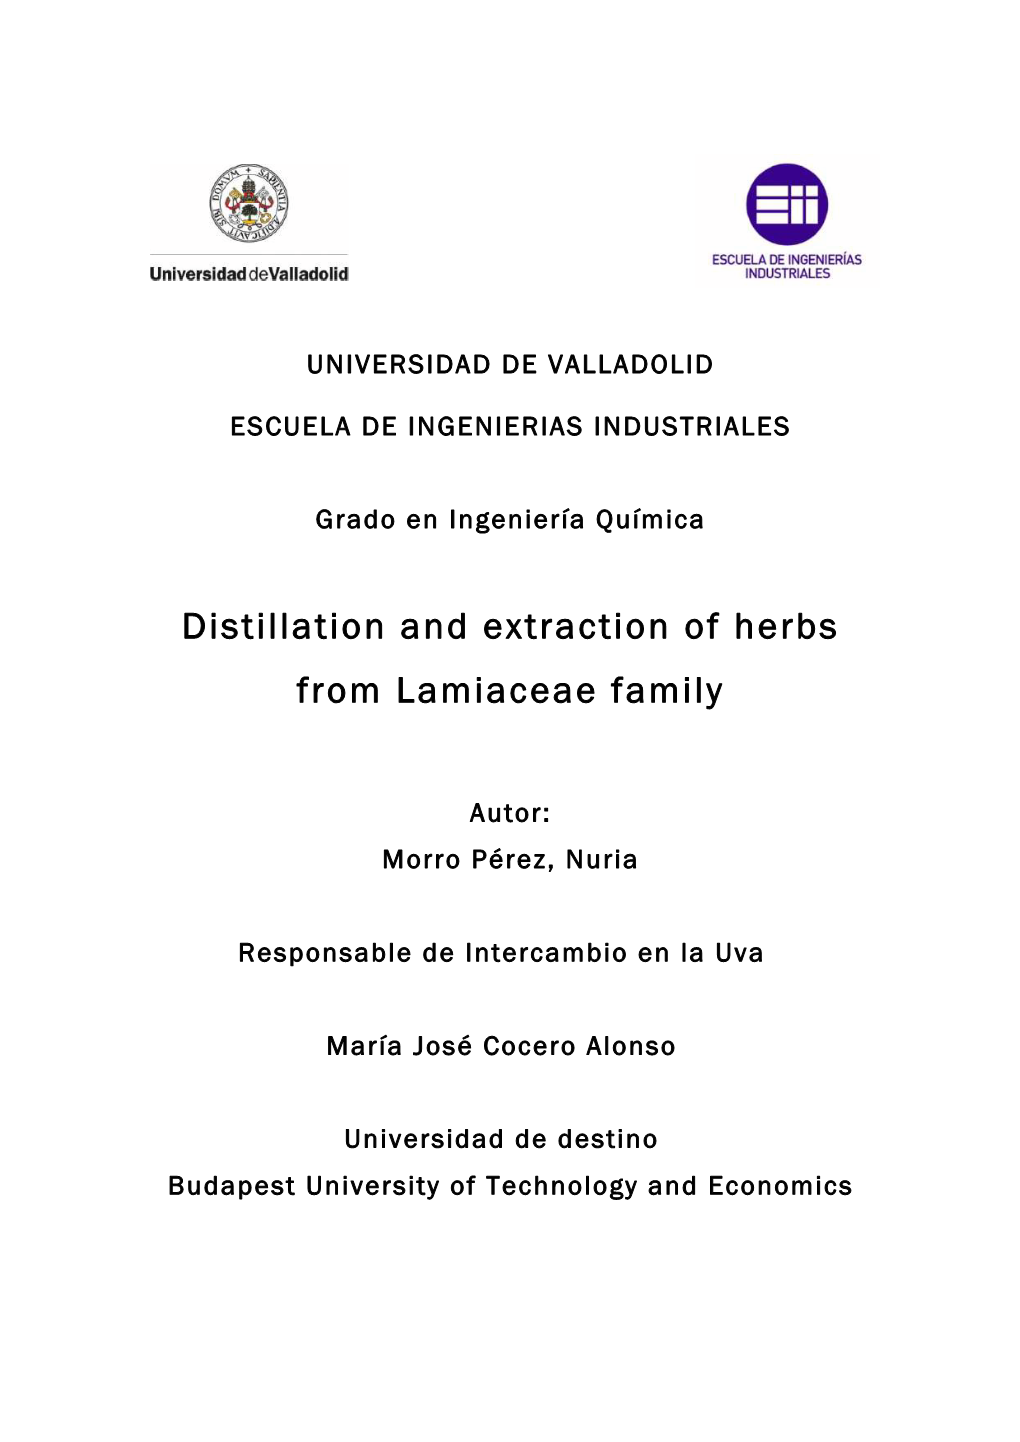 Distillation and Extraction of Herbs from Lamiaceae Family